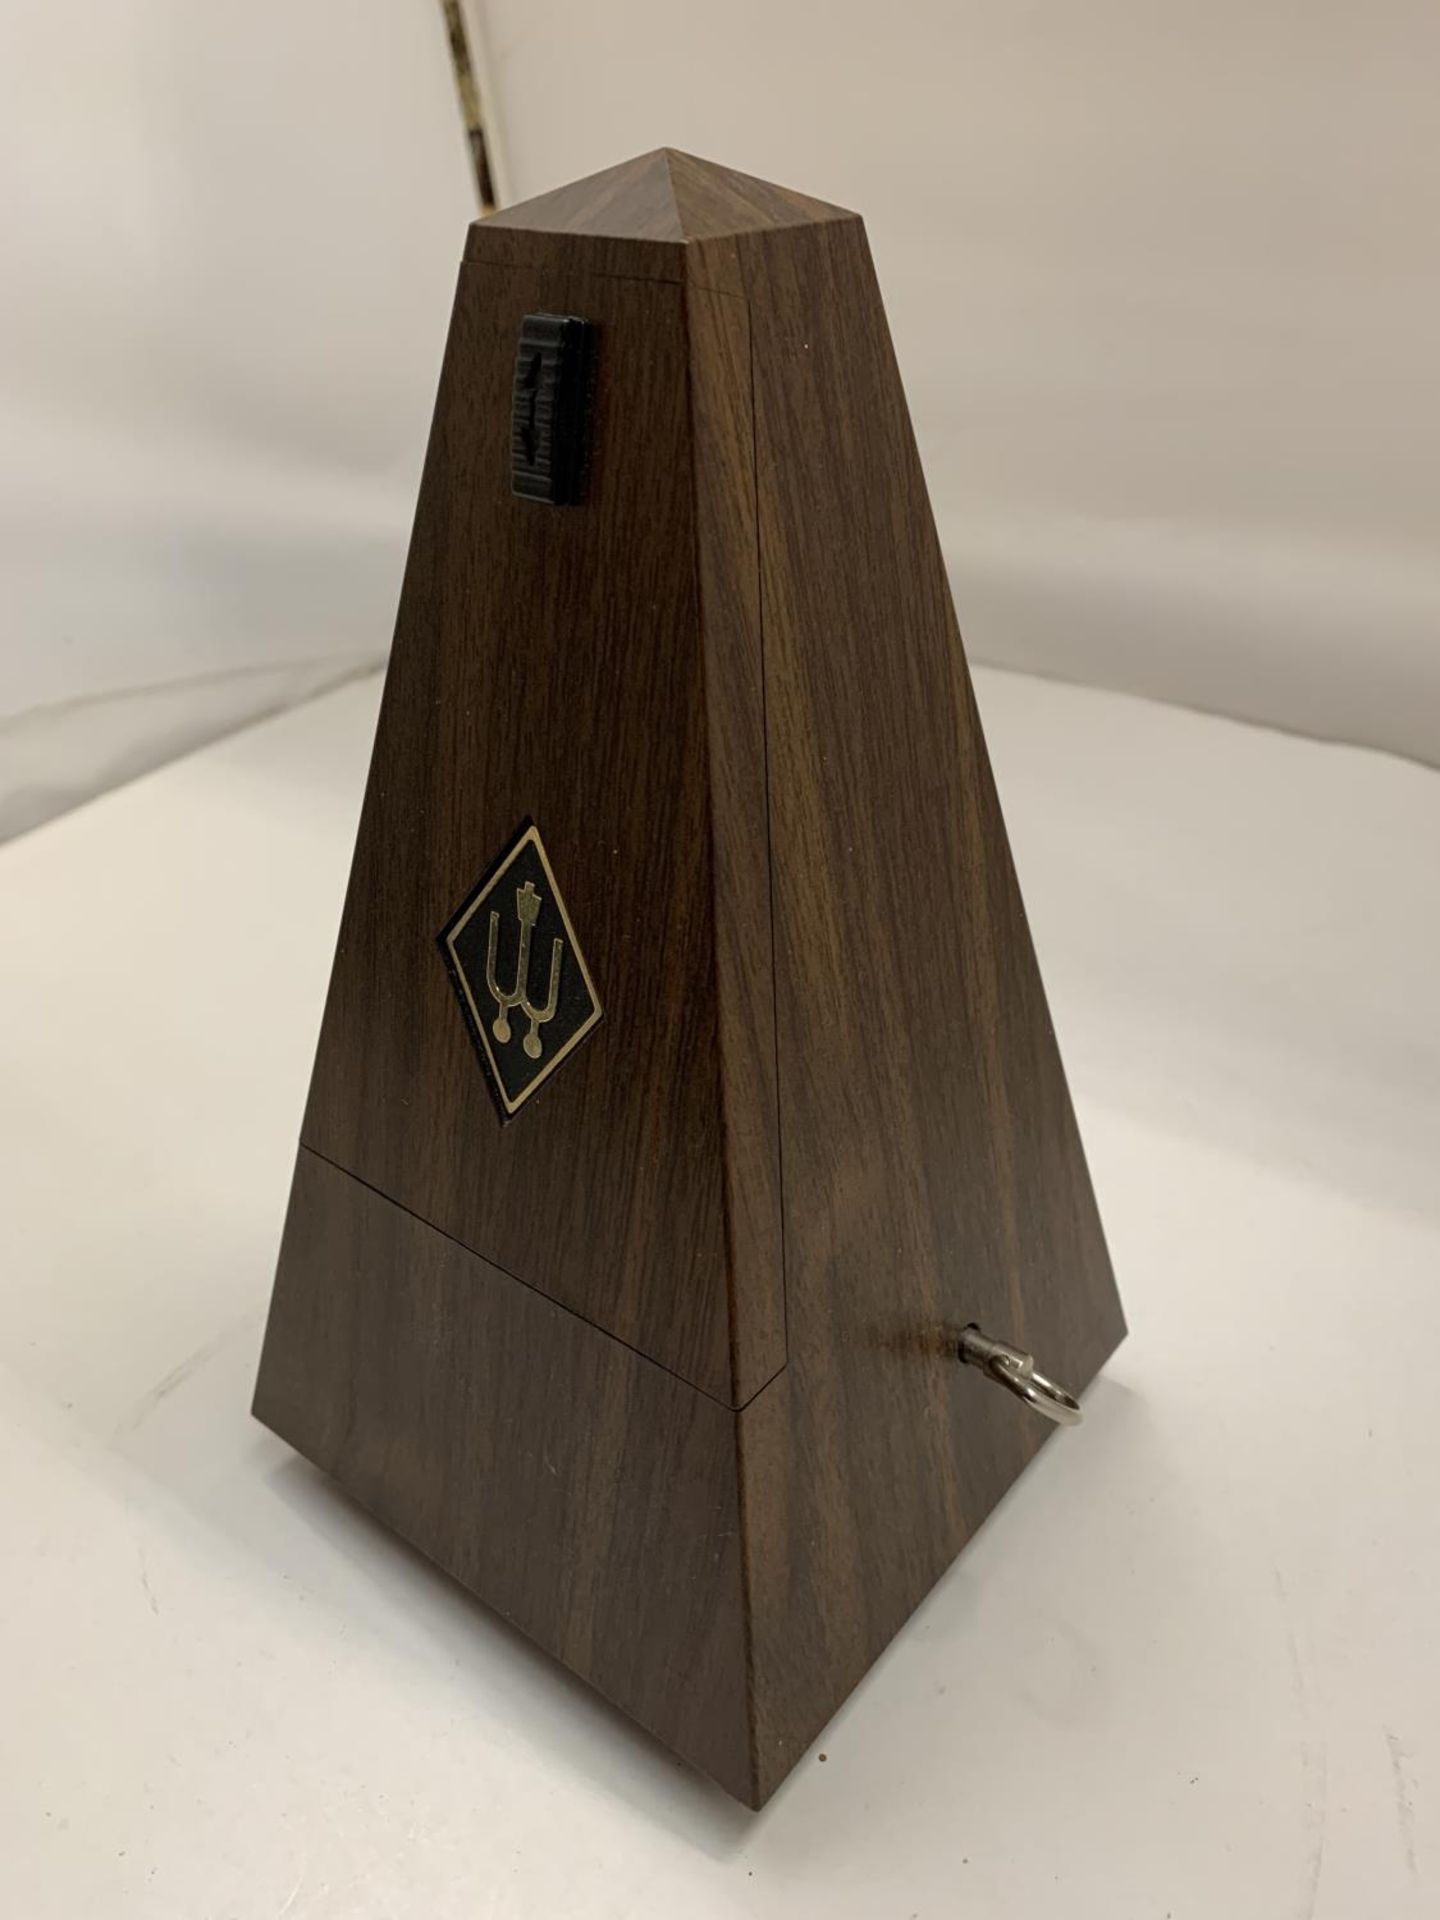 A WITTNER METRONOME - Image 2 of 4